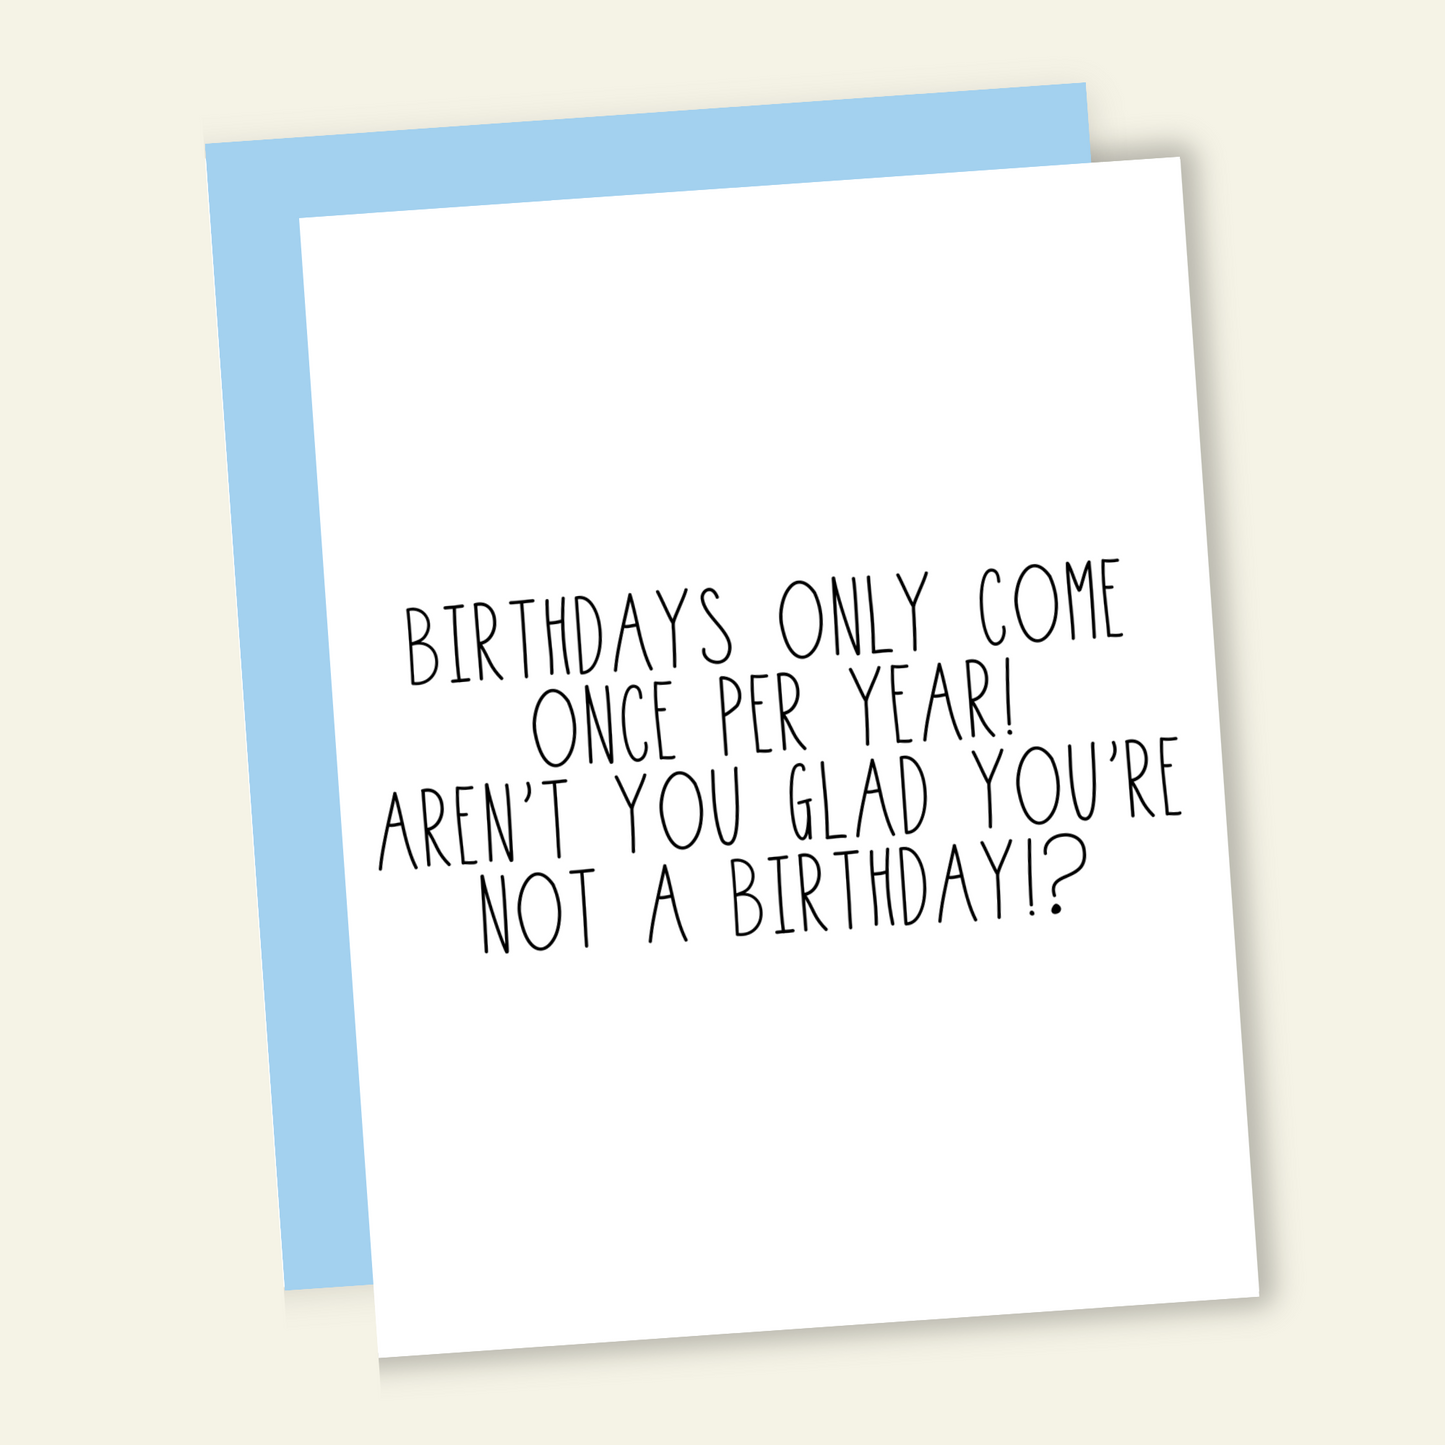 Birthdays Only Come Once Per Year... Card